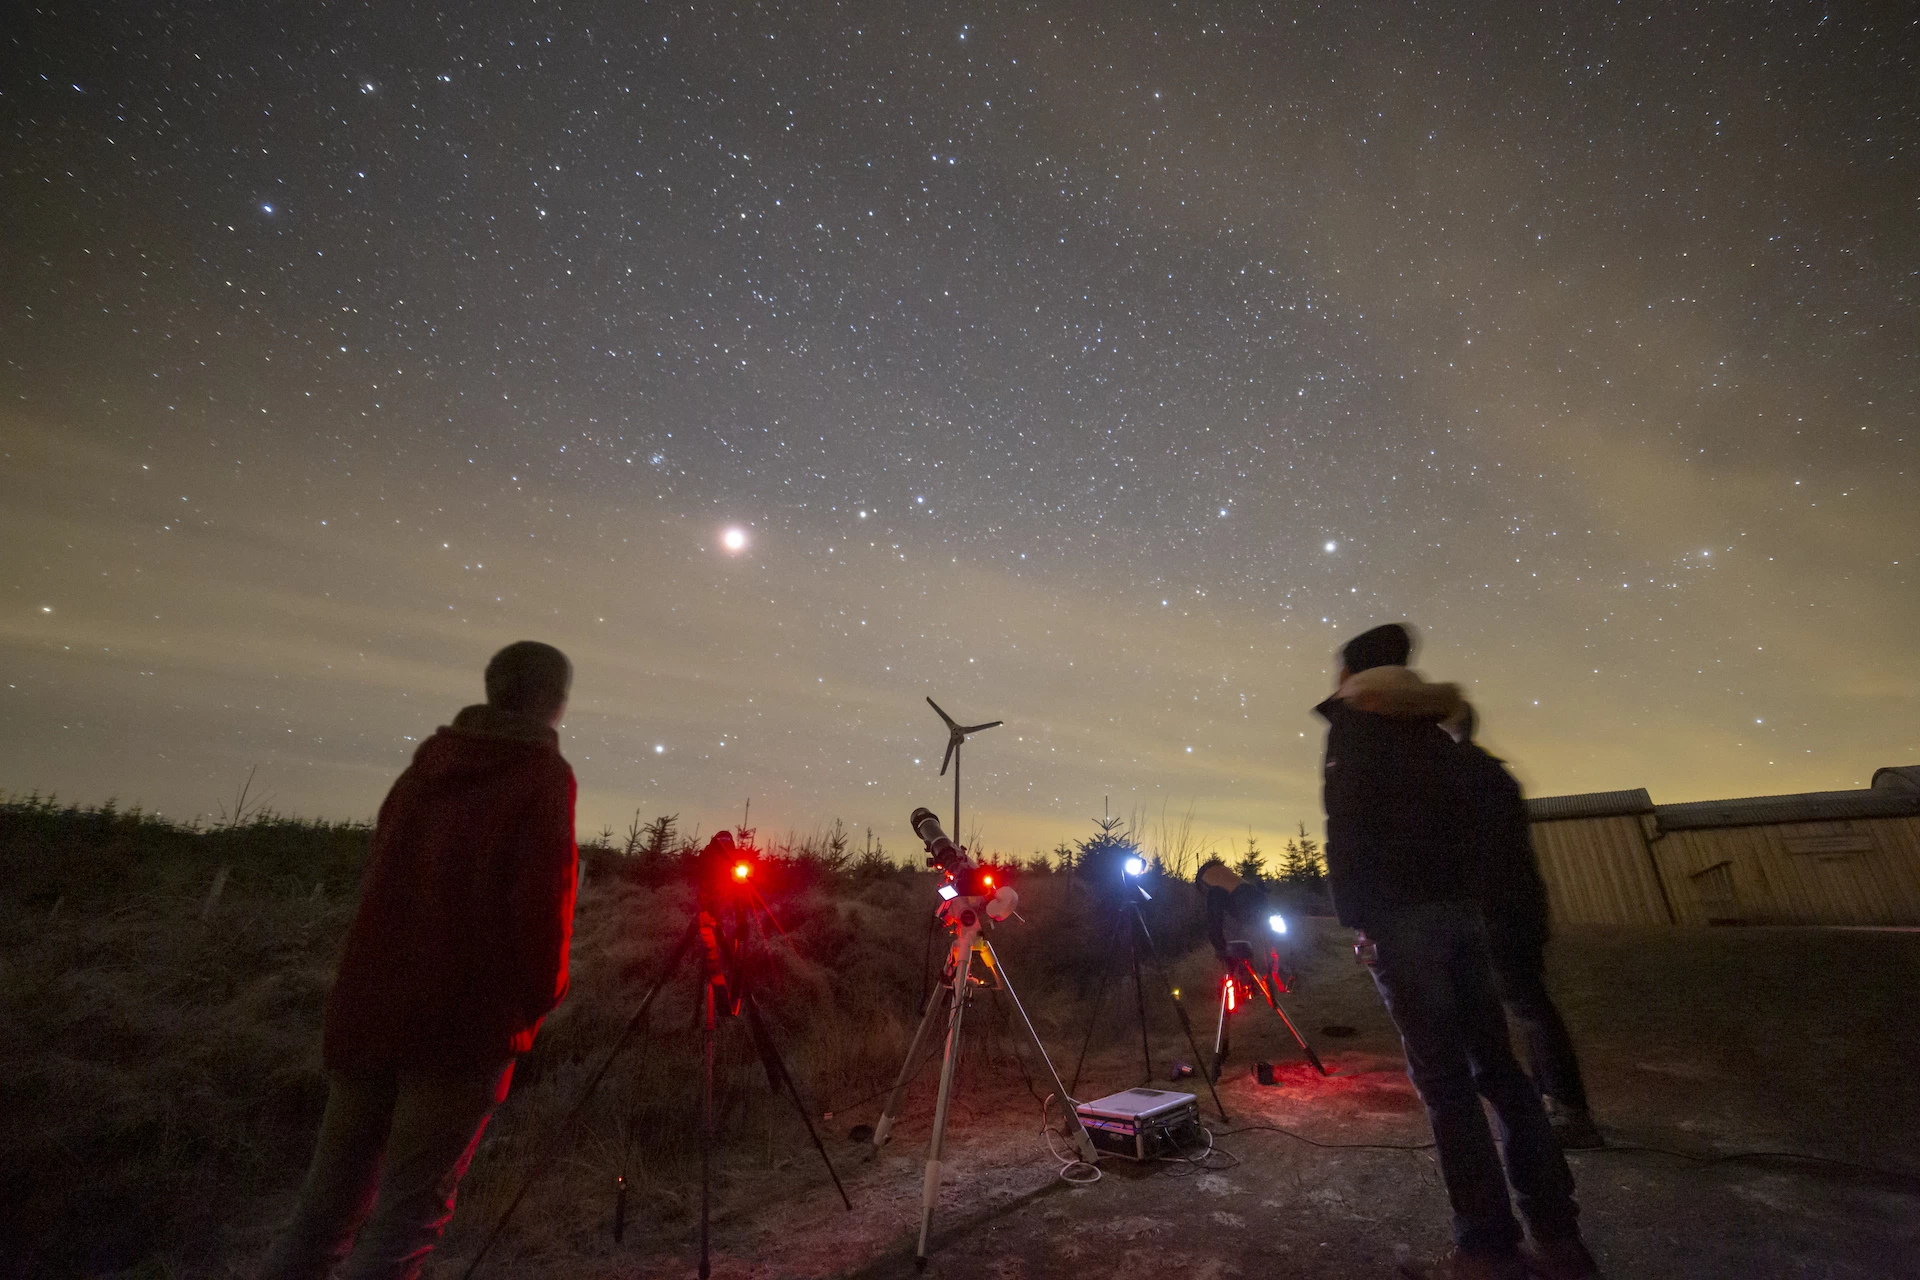 Stargazing at the Kielder Observatory – the Astronomical Society has benefitted from the Northumberland COVID Business Response Programme